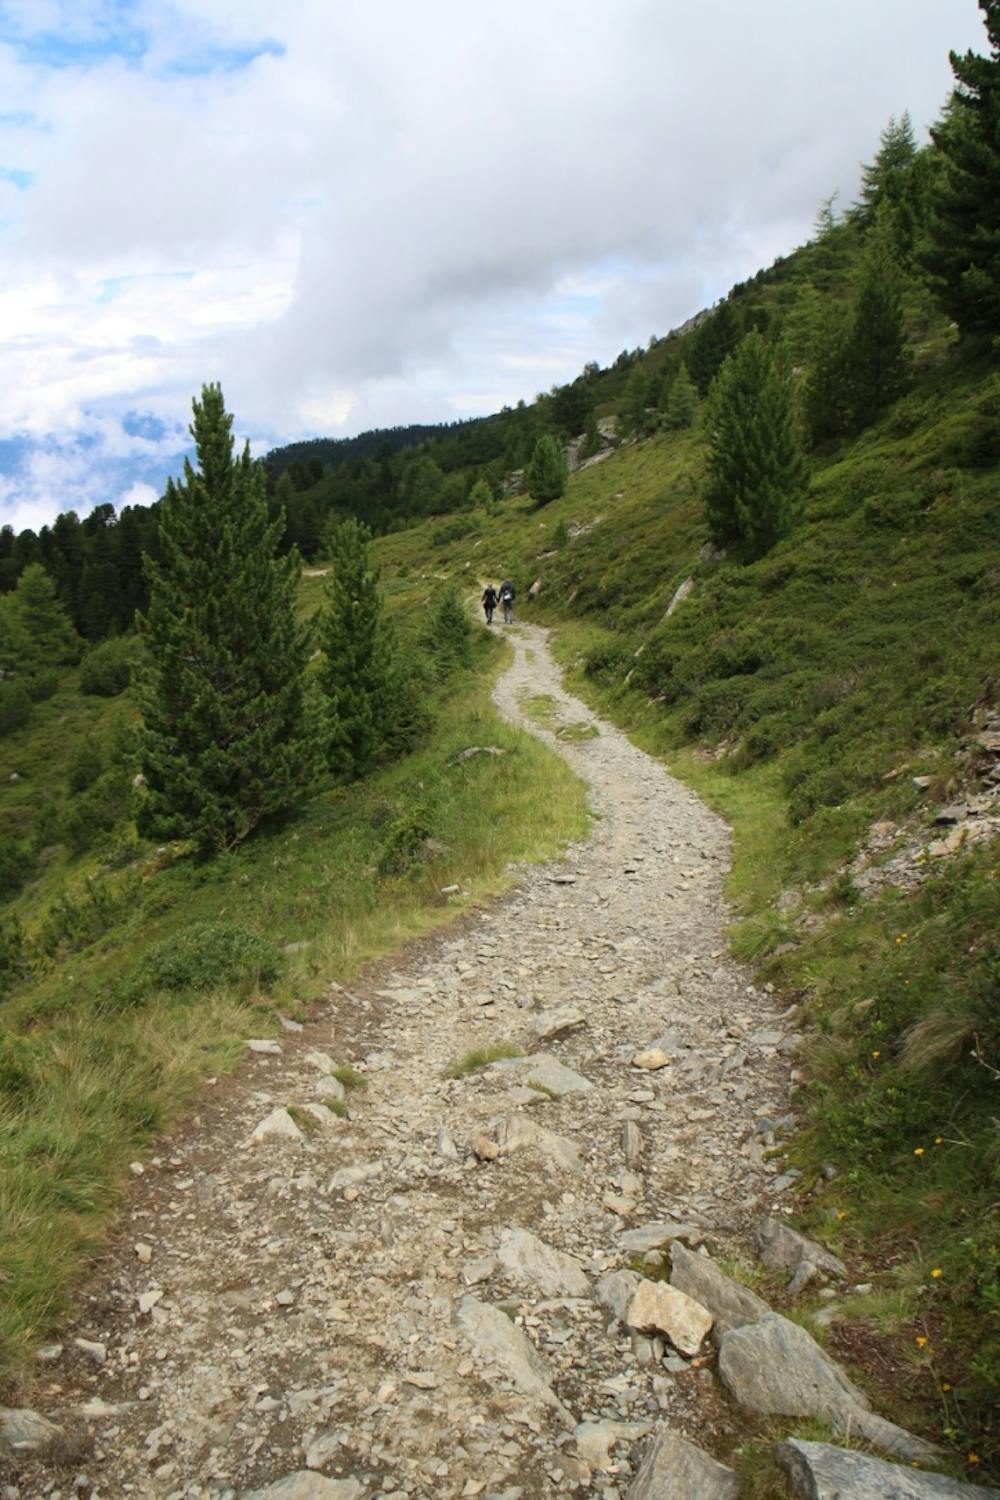 Typical terrain on the hike